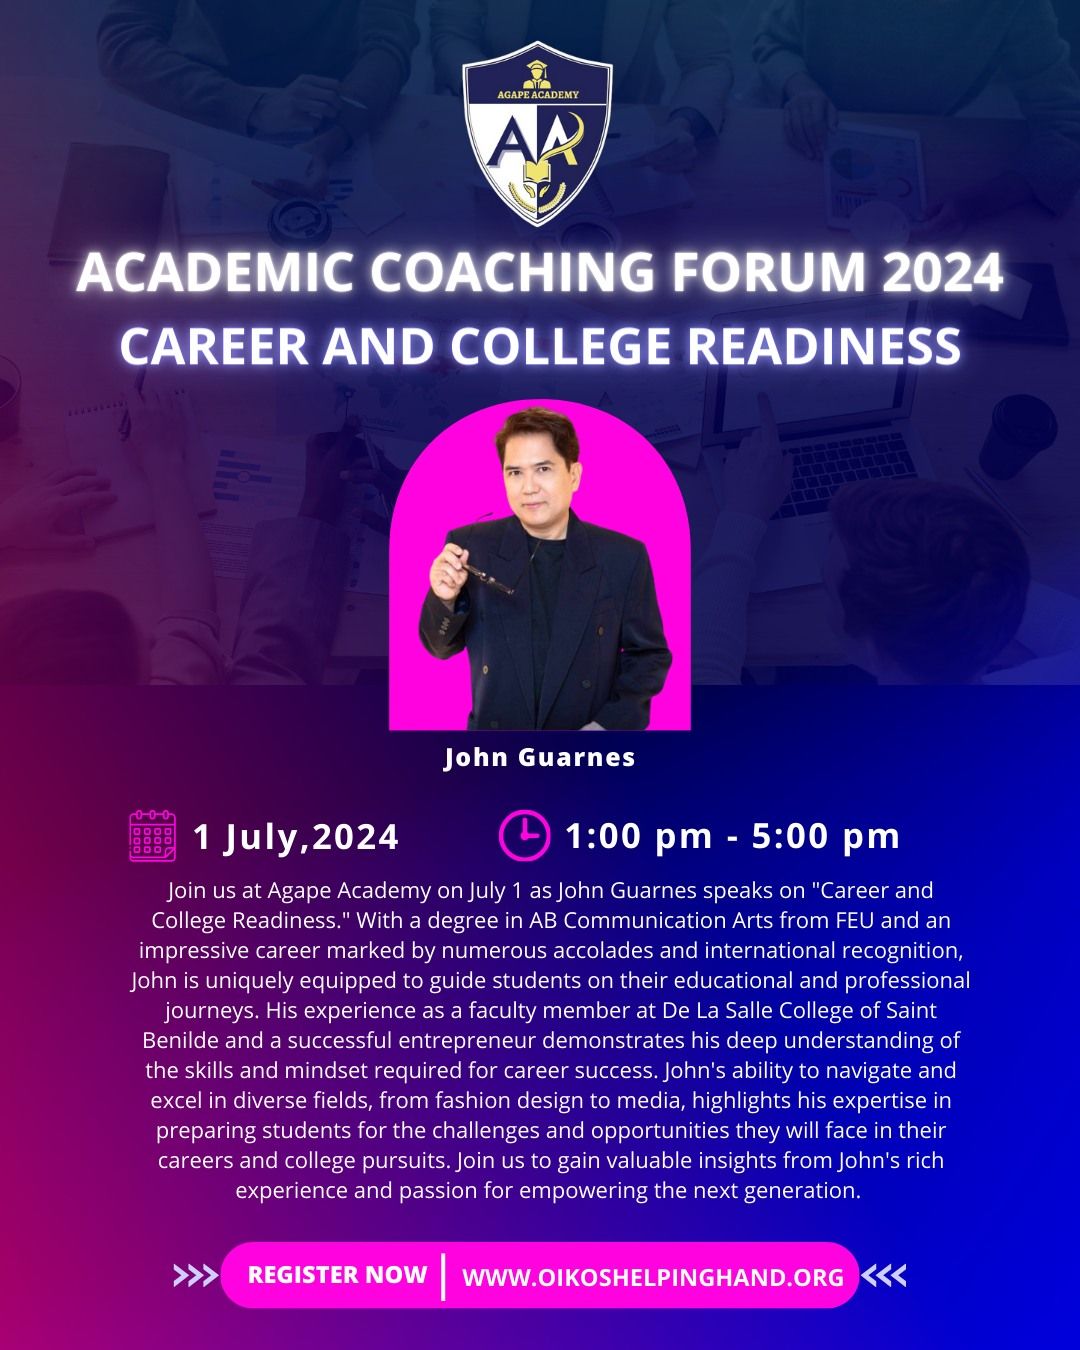 Academic Coaching Forum 2024: "Career and College Readiness"